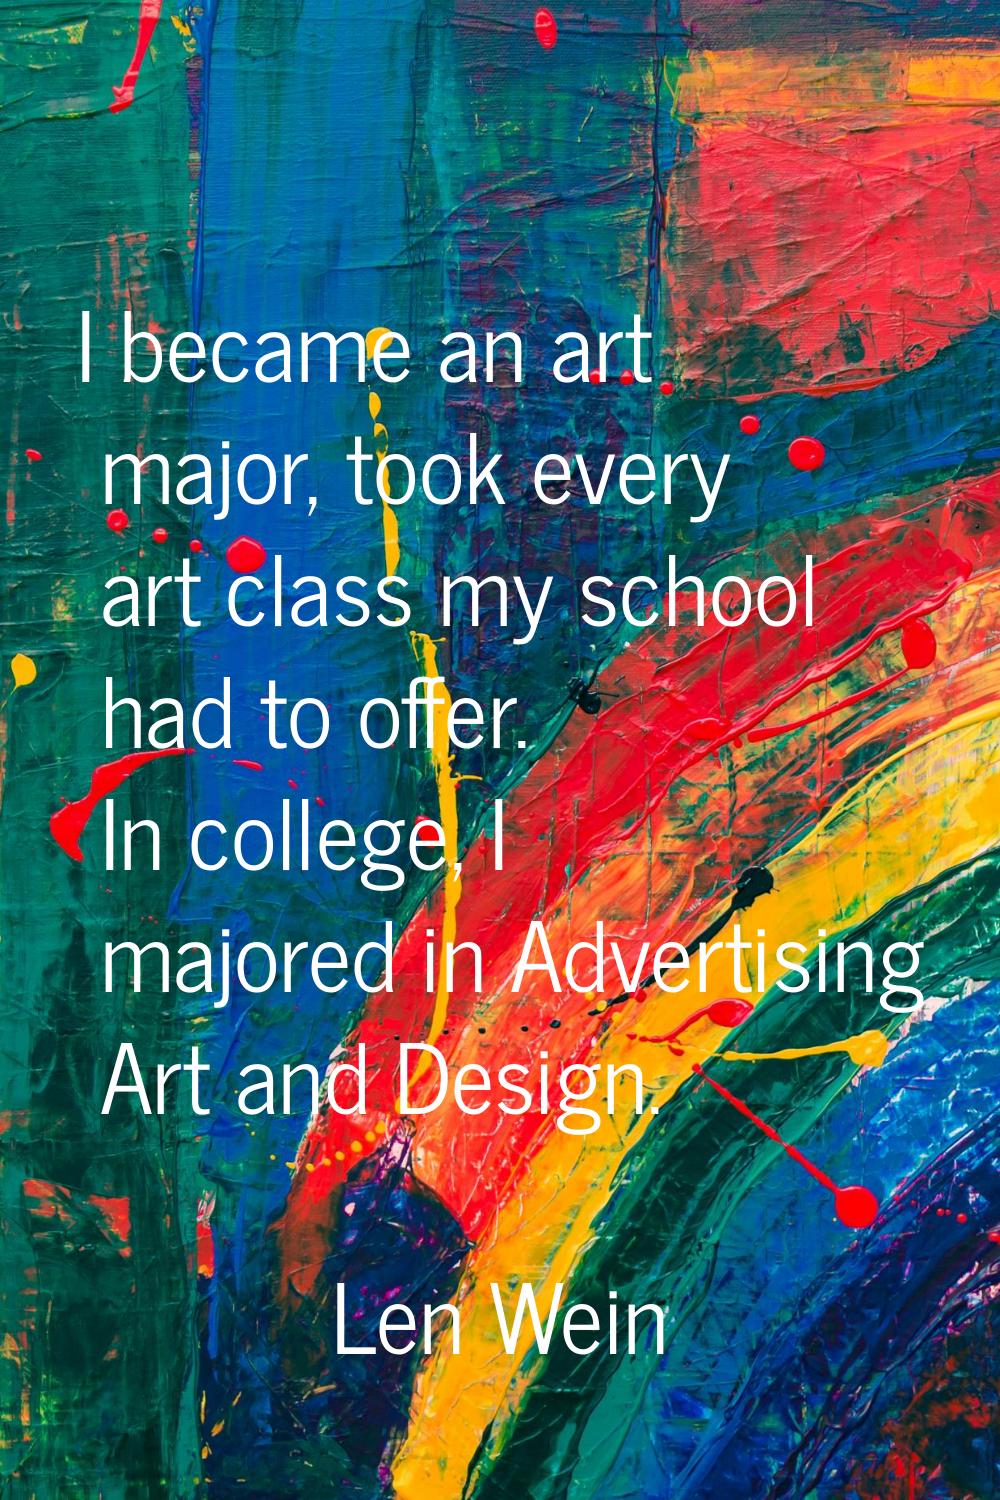 I became an art major, took every art class my school had to offer. In college, I majored in Advert